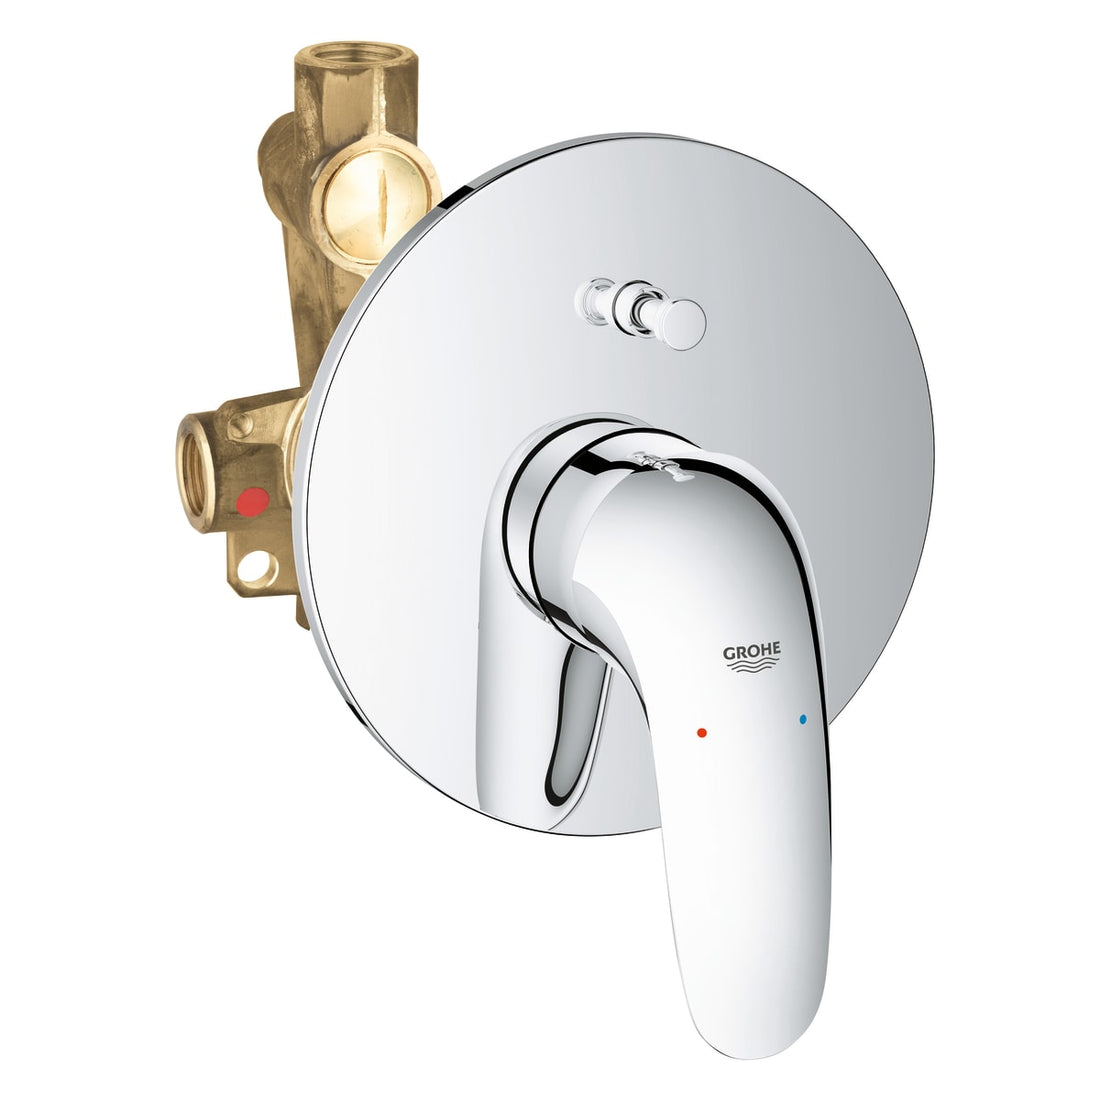 GROHE ESTYLE NEW CONCEALED SHOWER MIXER WITH DIVERTER CHROME - best price from Maltashopper.com BR430009029